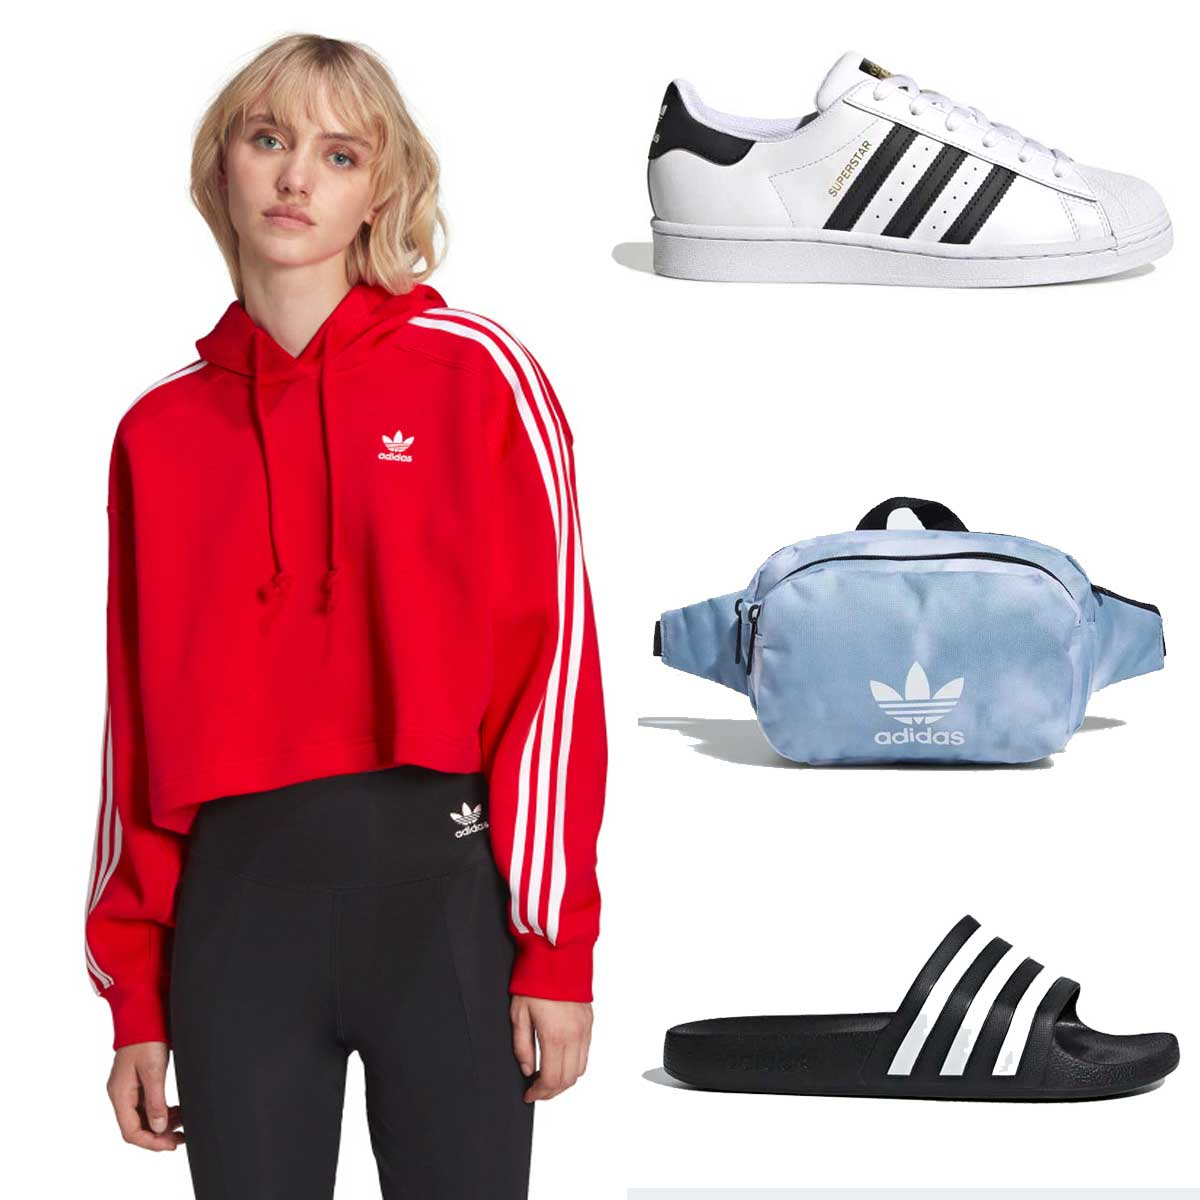 Adidas End of Season Deals: Up to 60% Clothes, Shoes & More E! Online